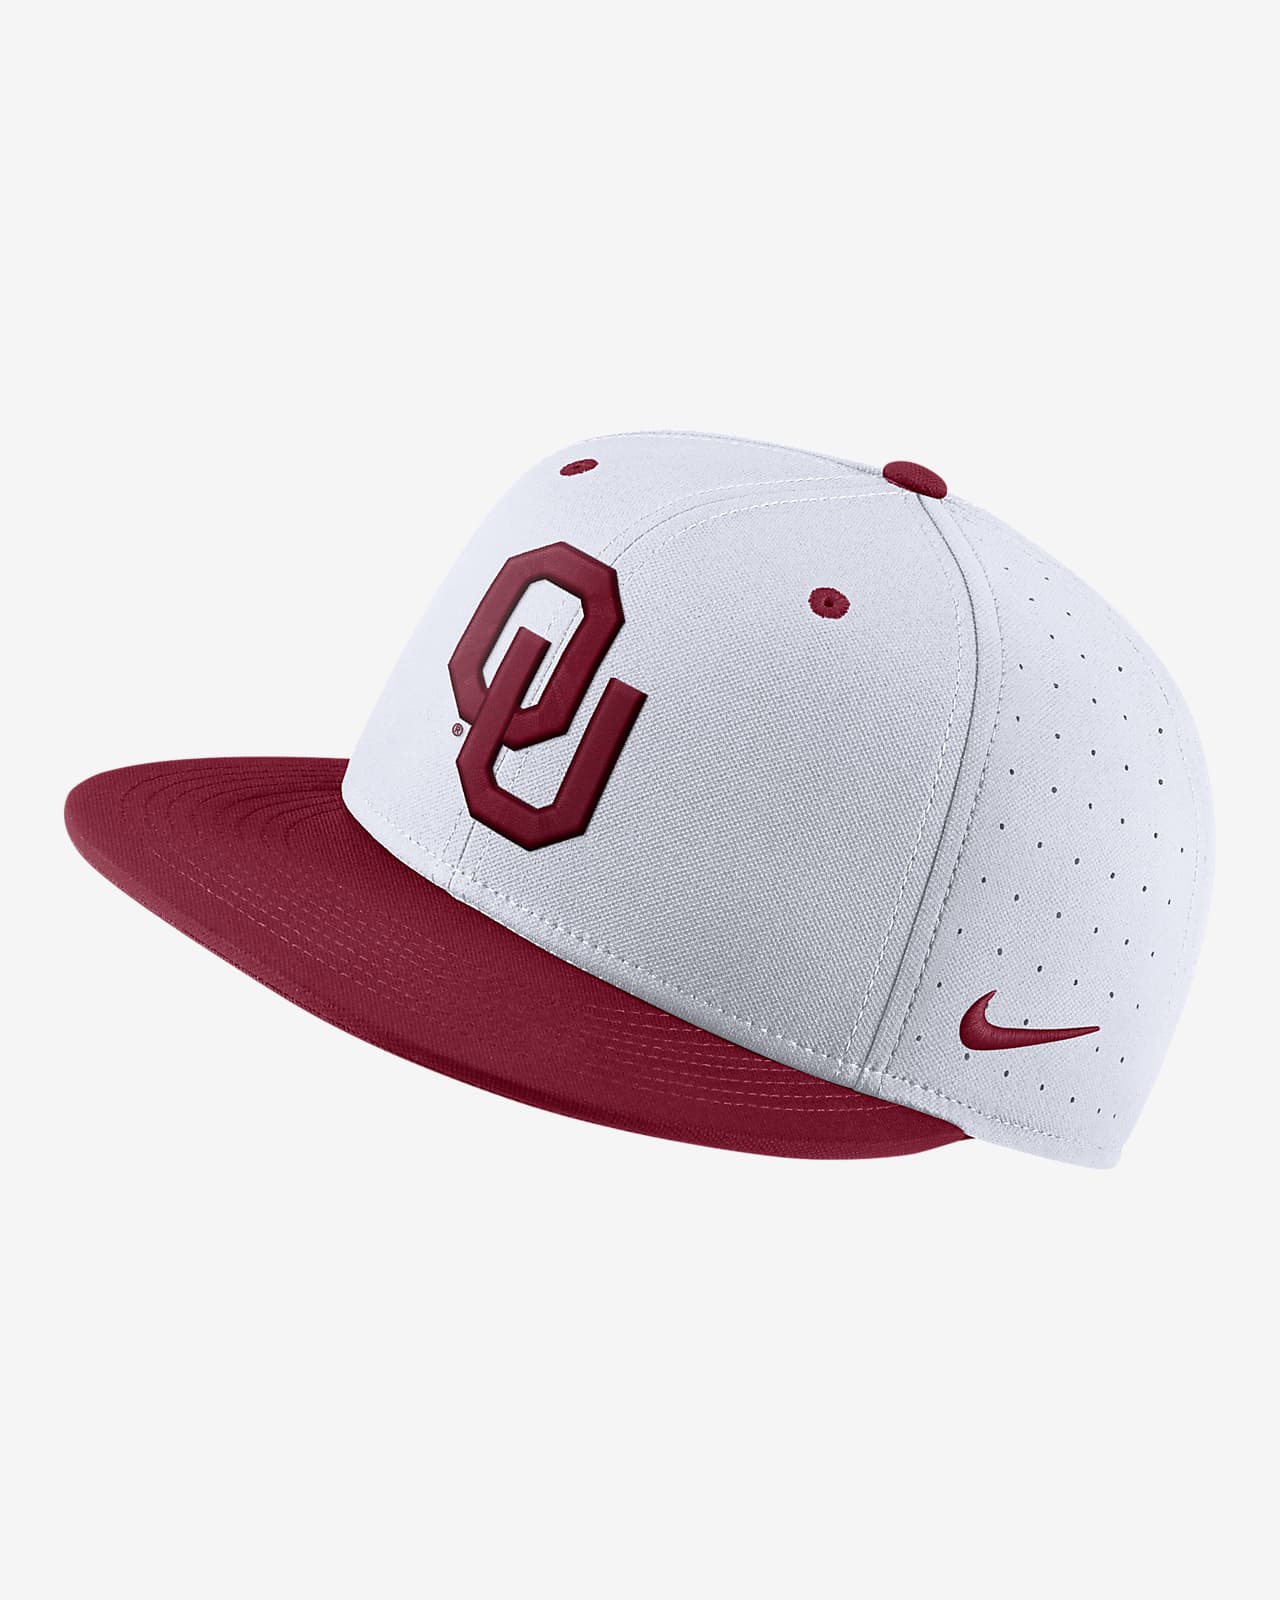 Oklahoma Nike College Fitted Baseball Hat